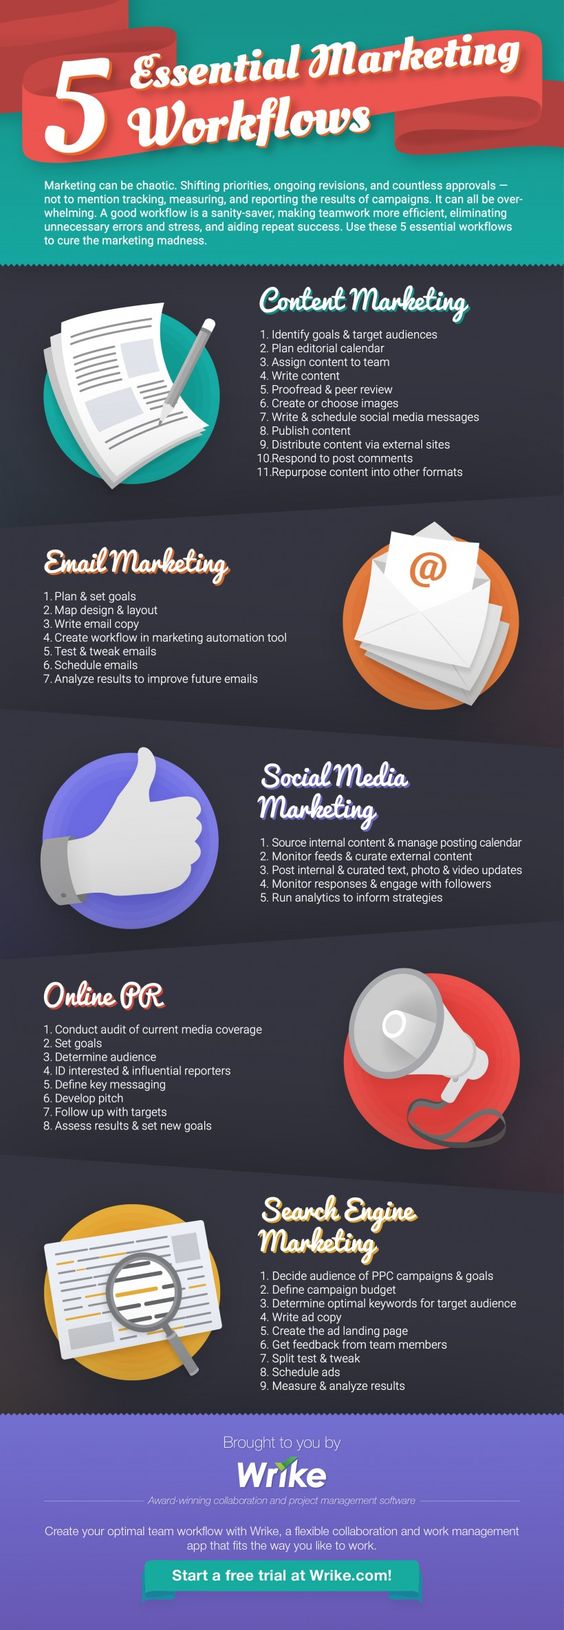 Content Marketing, Search Engine, Email, Social Media, Online PR: 5 Essential Digital Marketing Workflows - #infographic